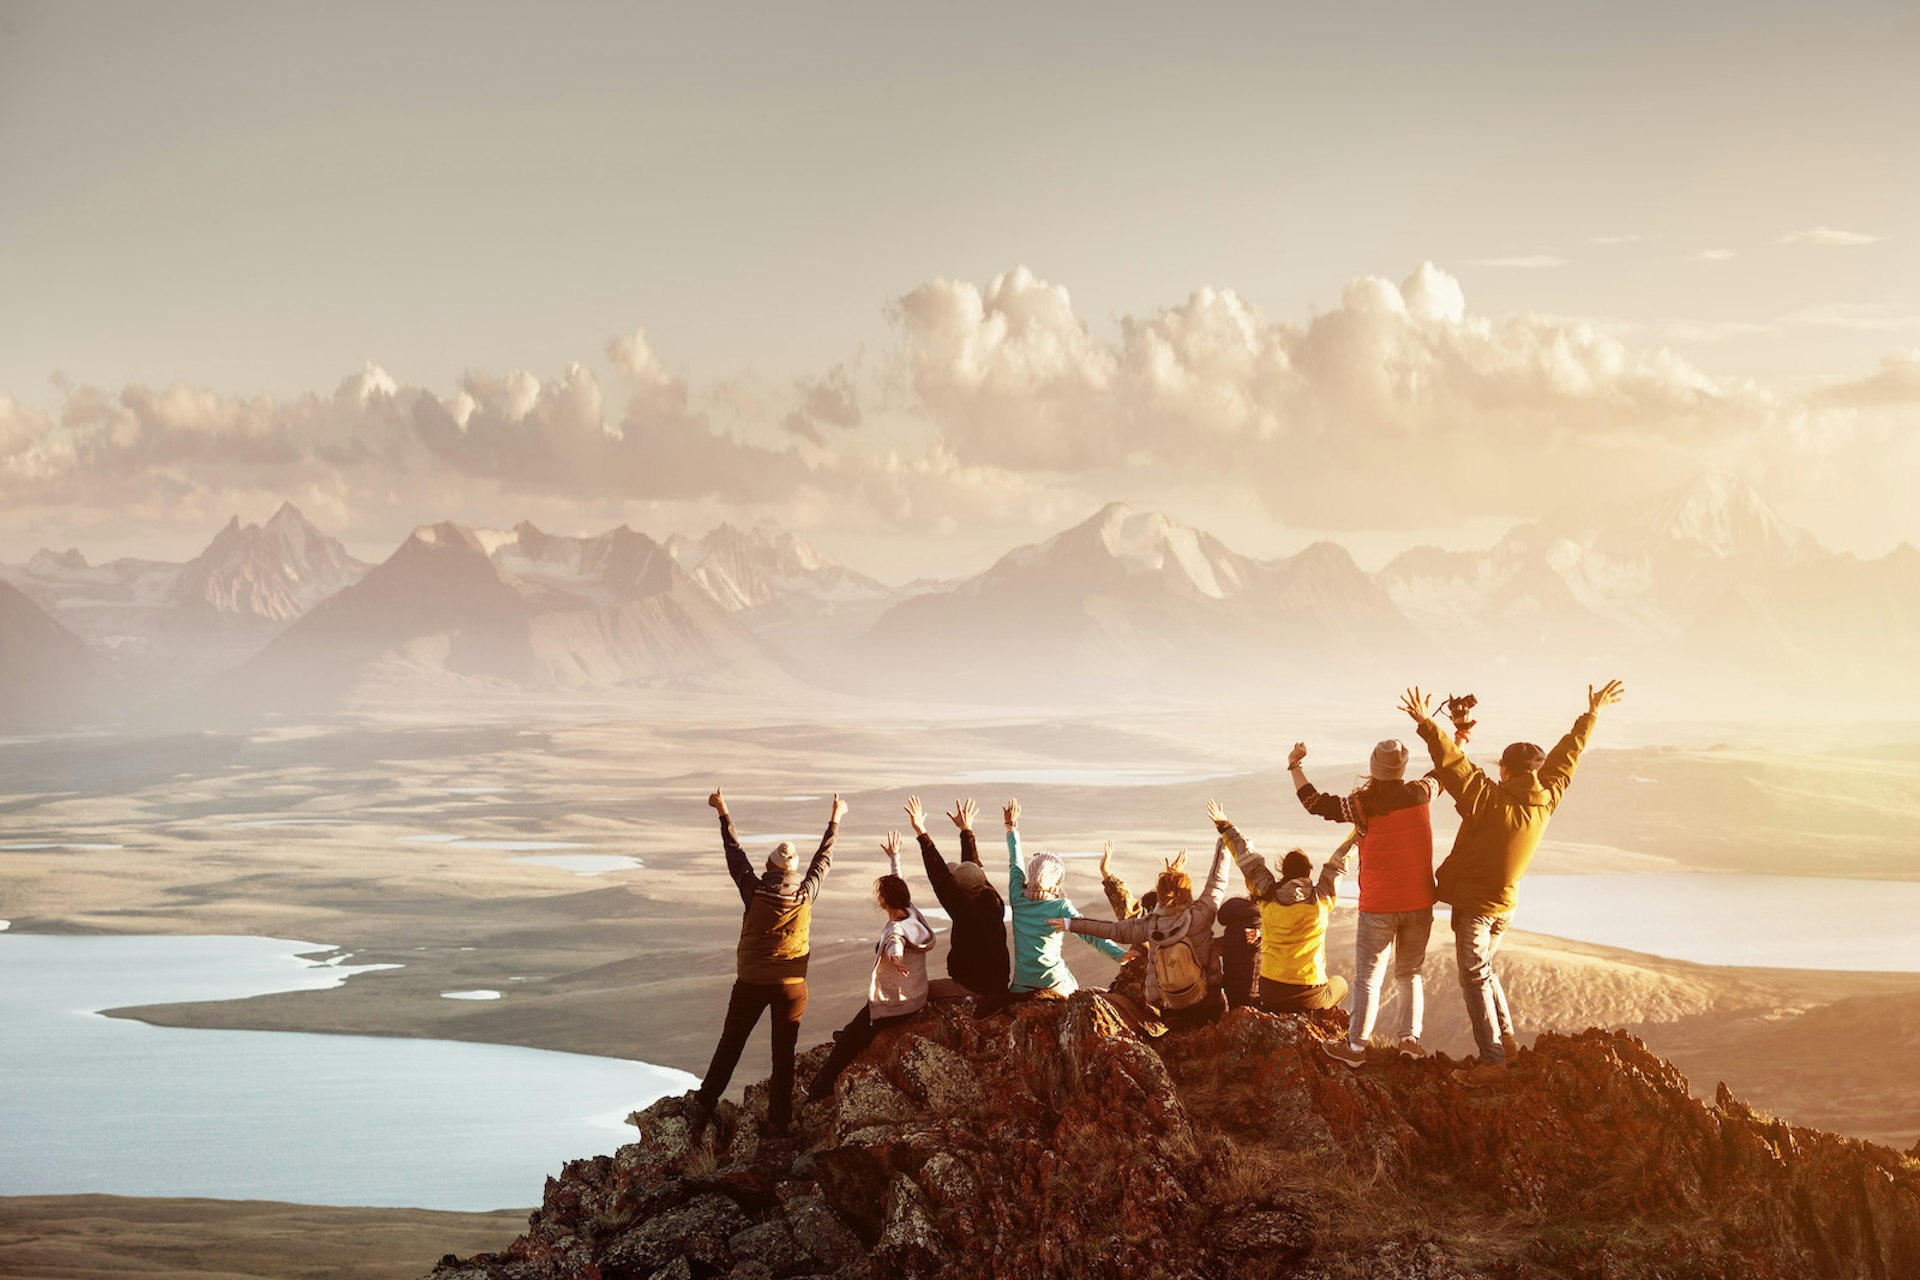 A group of people celebrate on the summit of a mountain